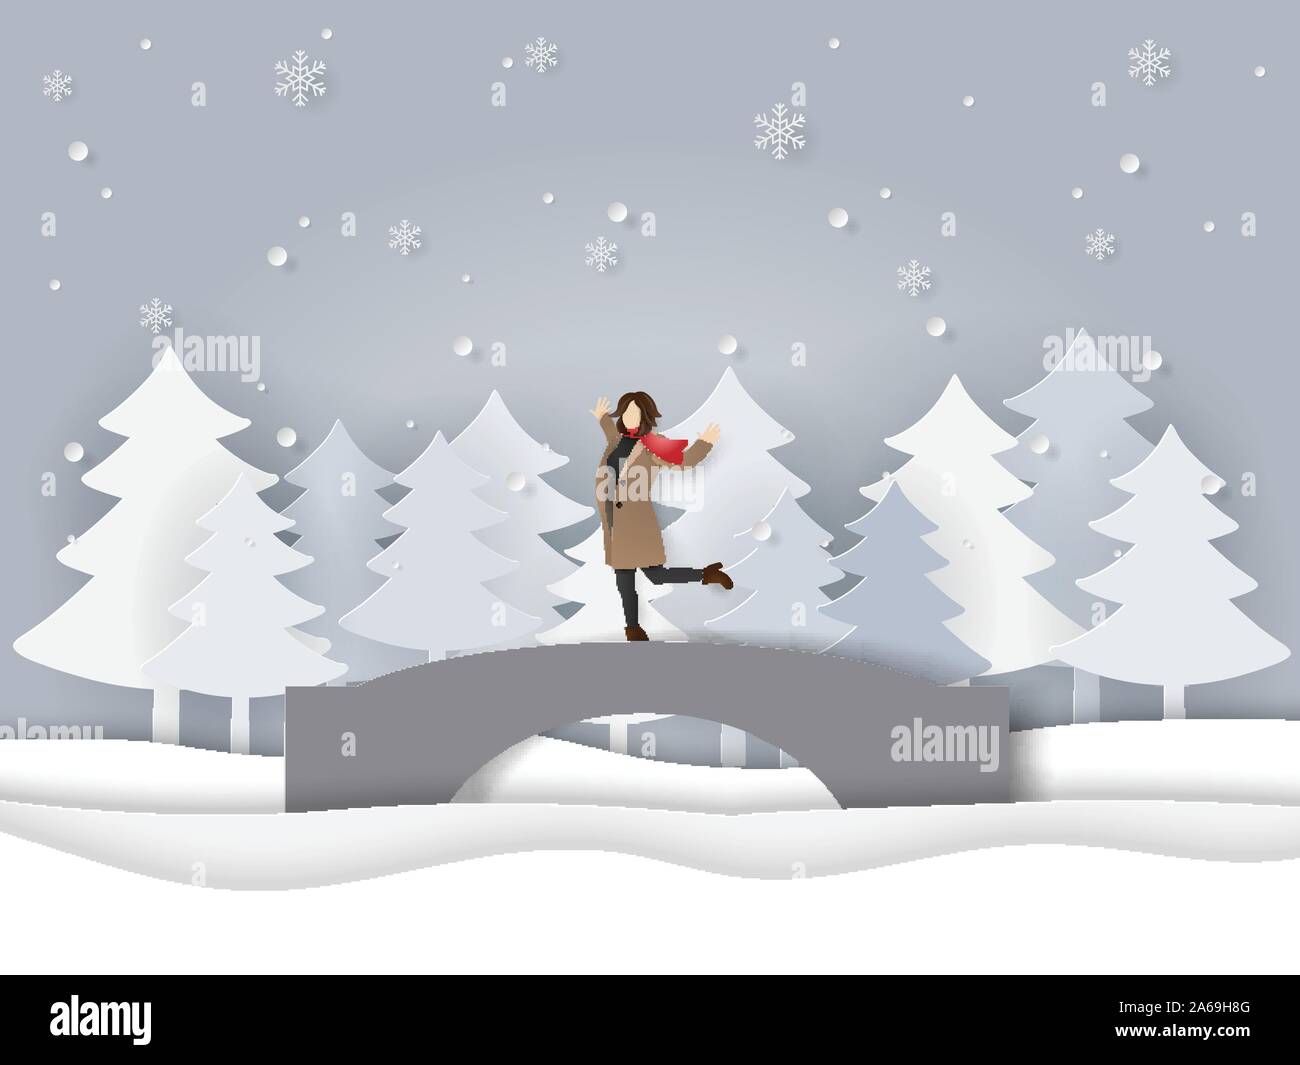 Paper art and craft style of winter season, A happy woman wearing clothes and scarf standing on the bridge with snowing, welcome winter season Stock Vector